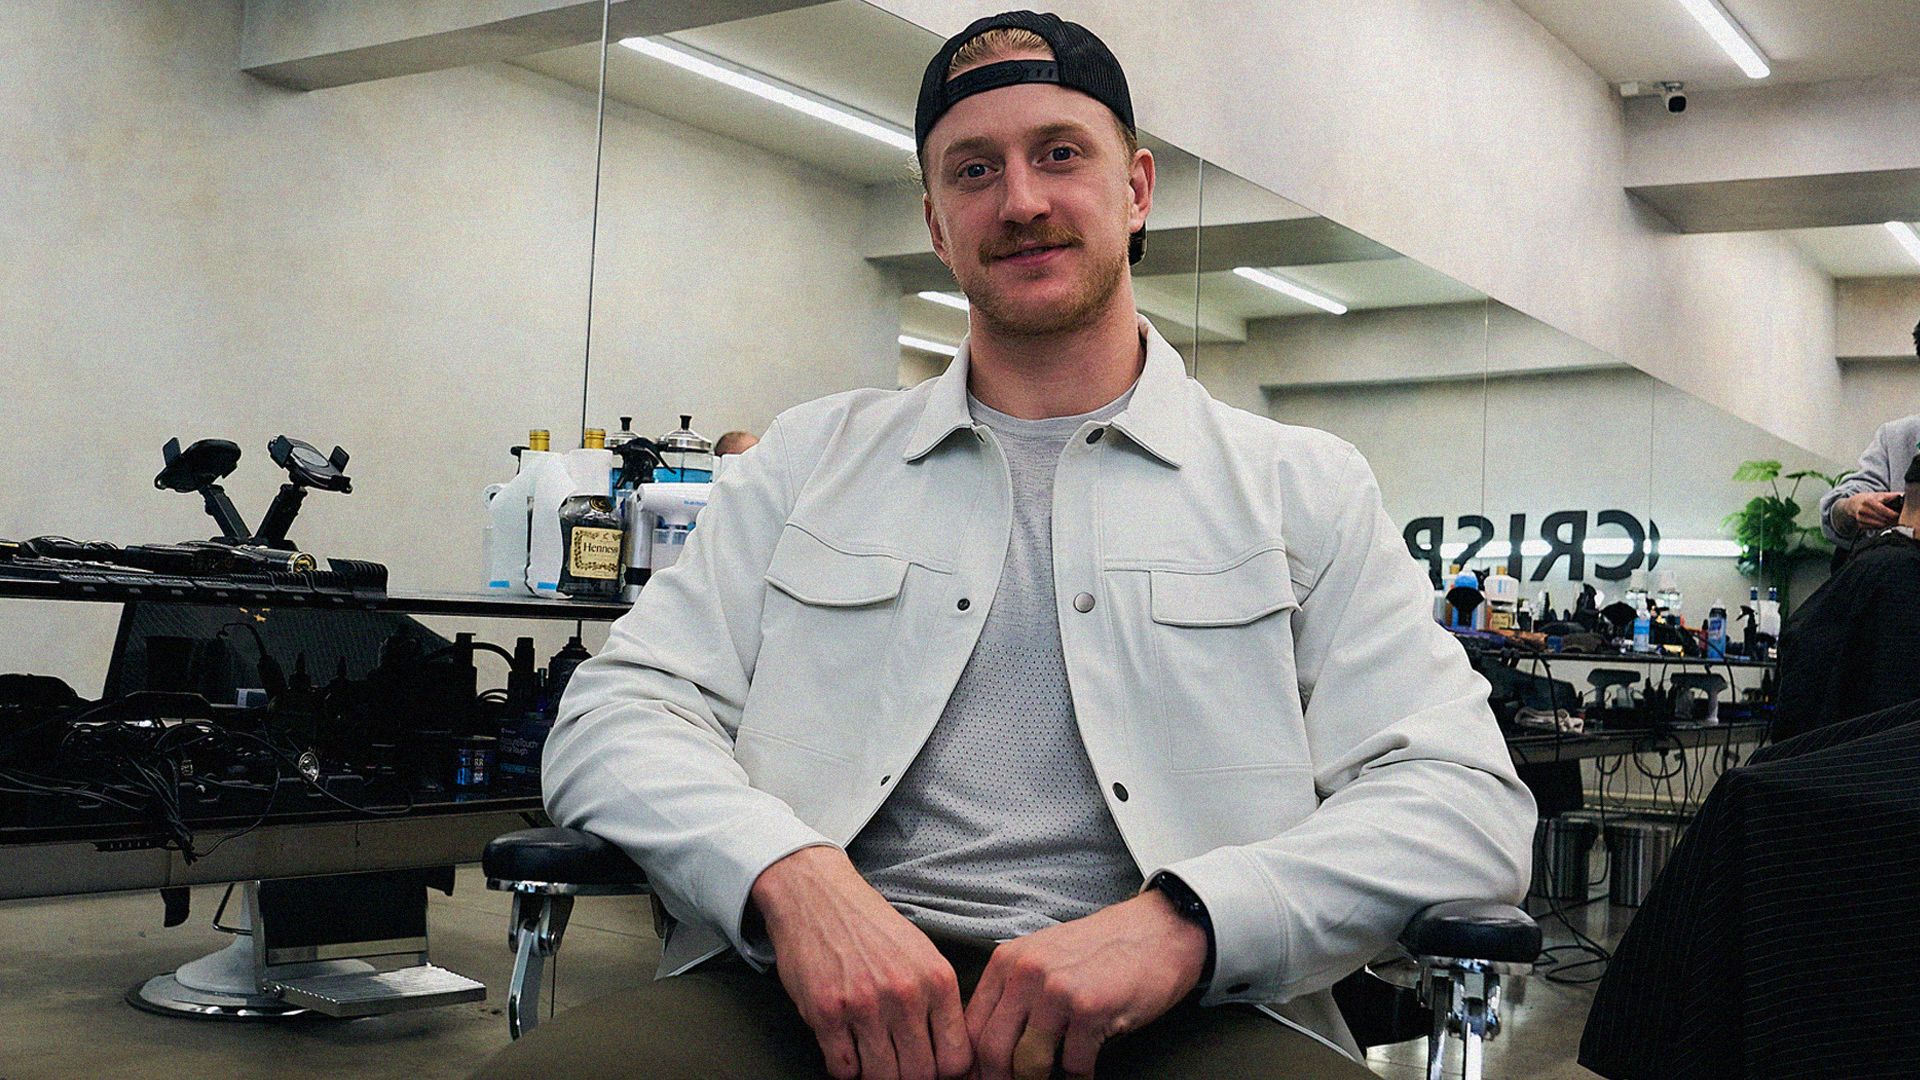 NHL hockey player Michael Pezzetta sits in a barbershop in Montreal, he's got a backwards cap on, and an epic moustache